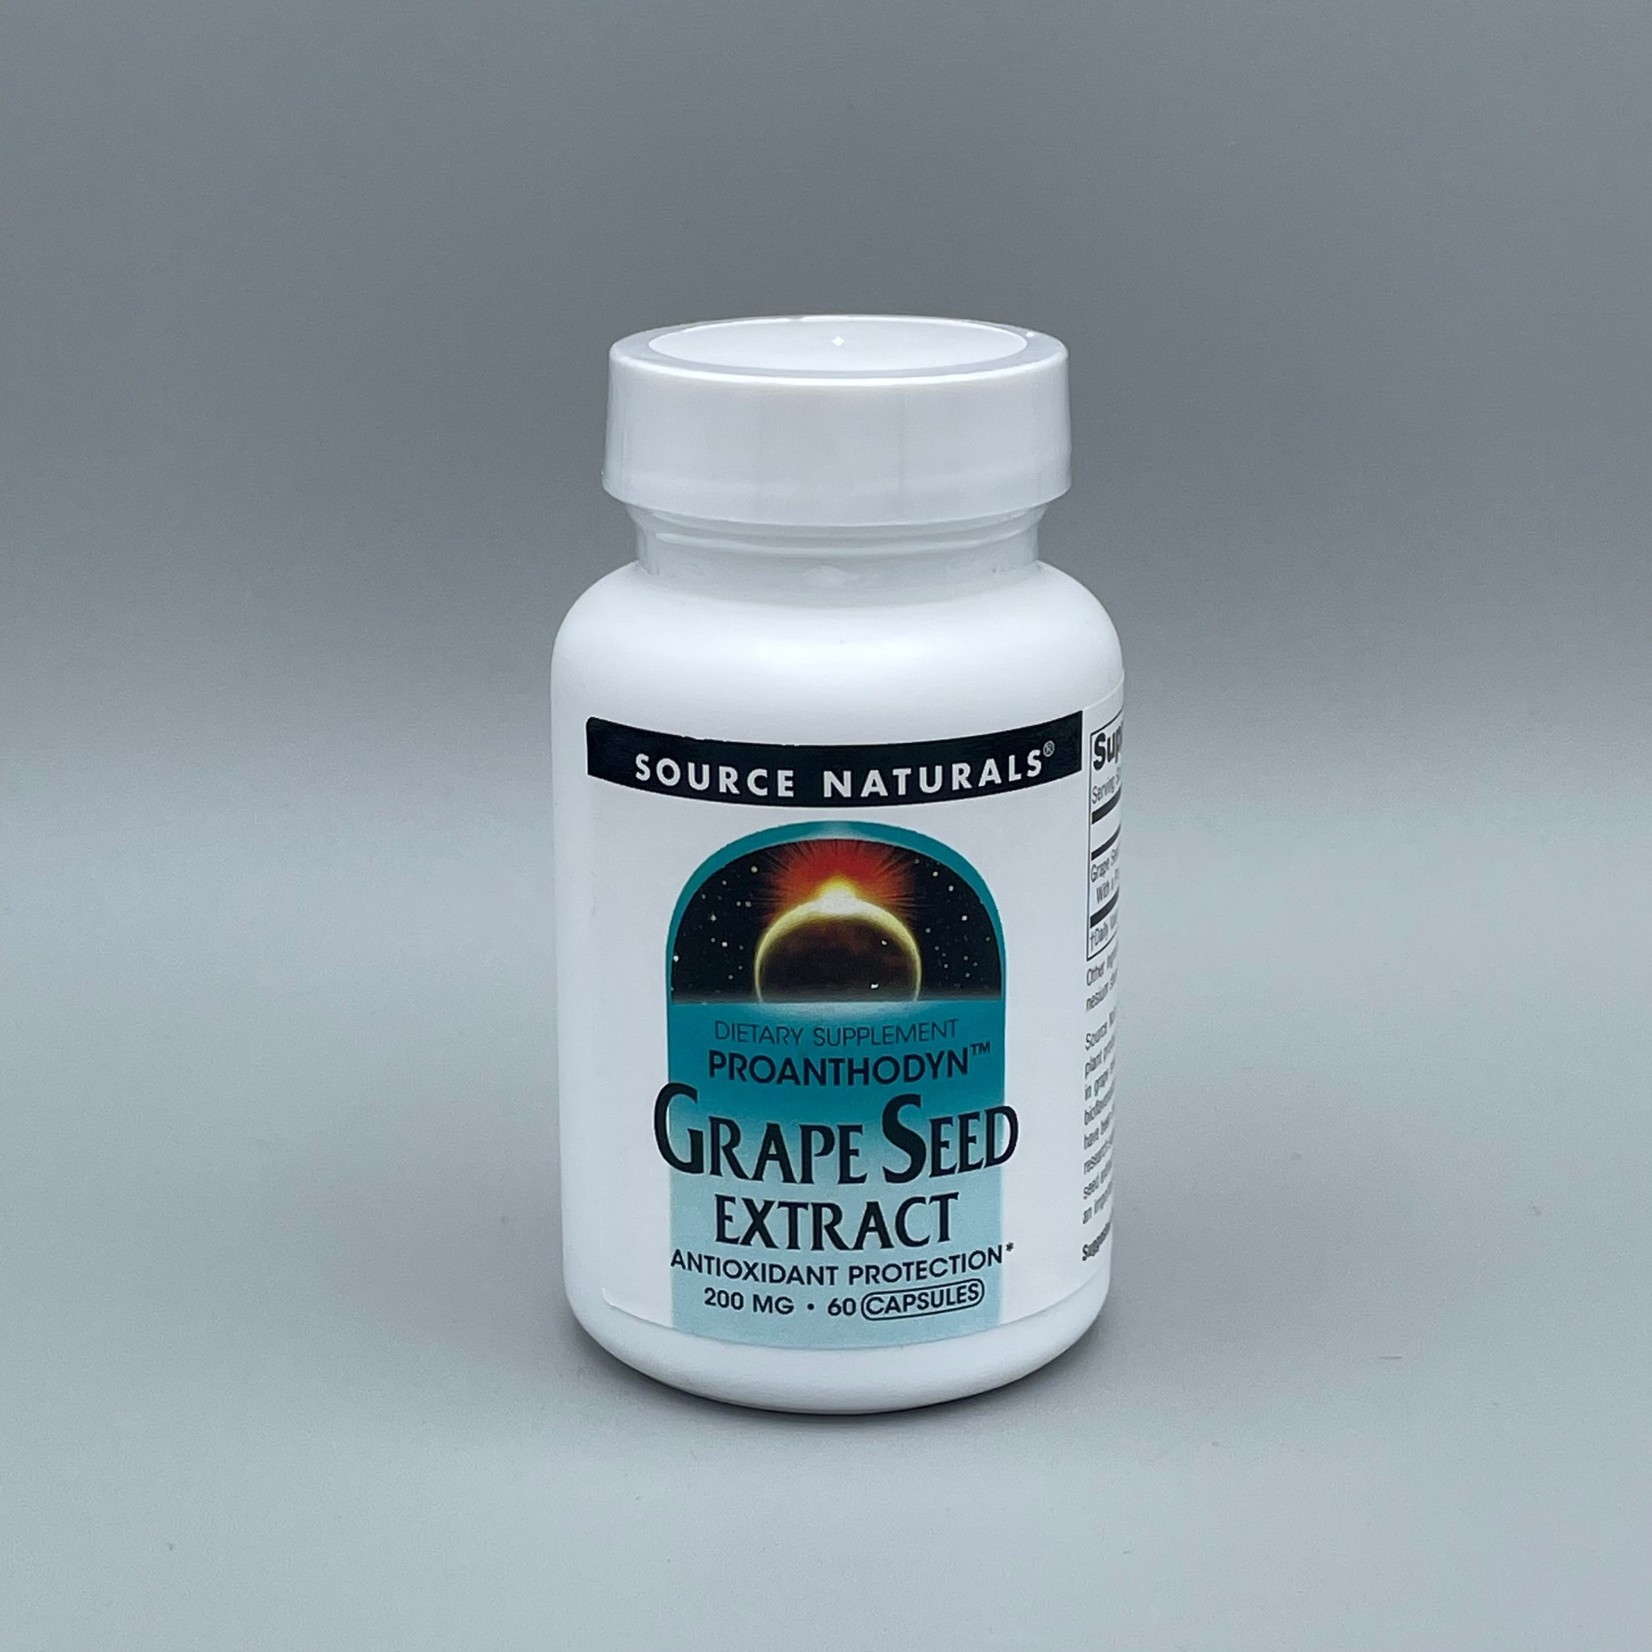 Source Naturals Grape Seed Extract (Proanthodyn) - 200 mg, 60 Capsules